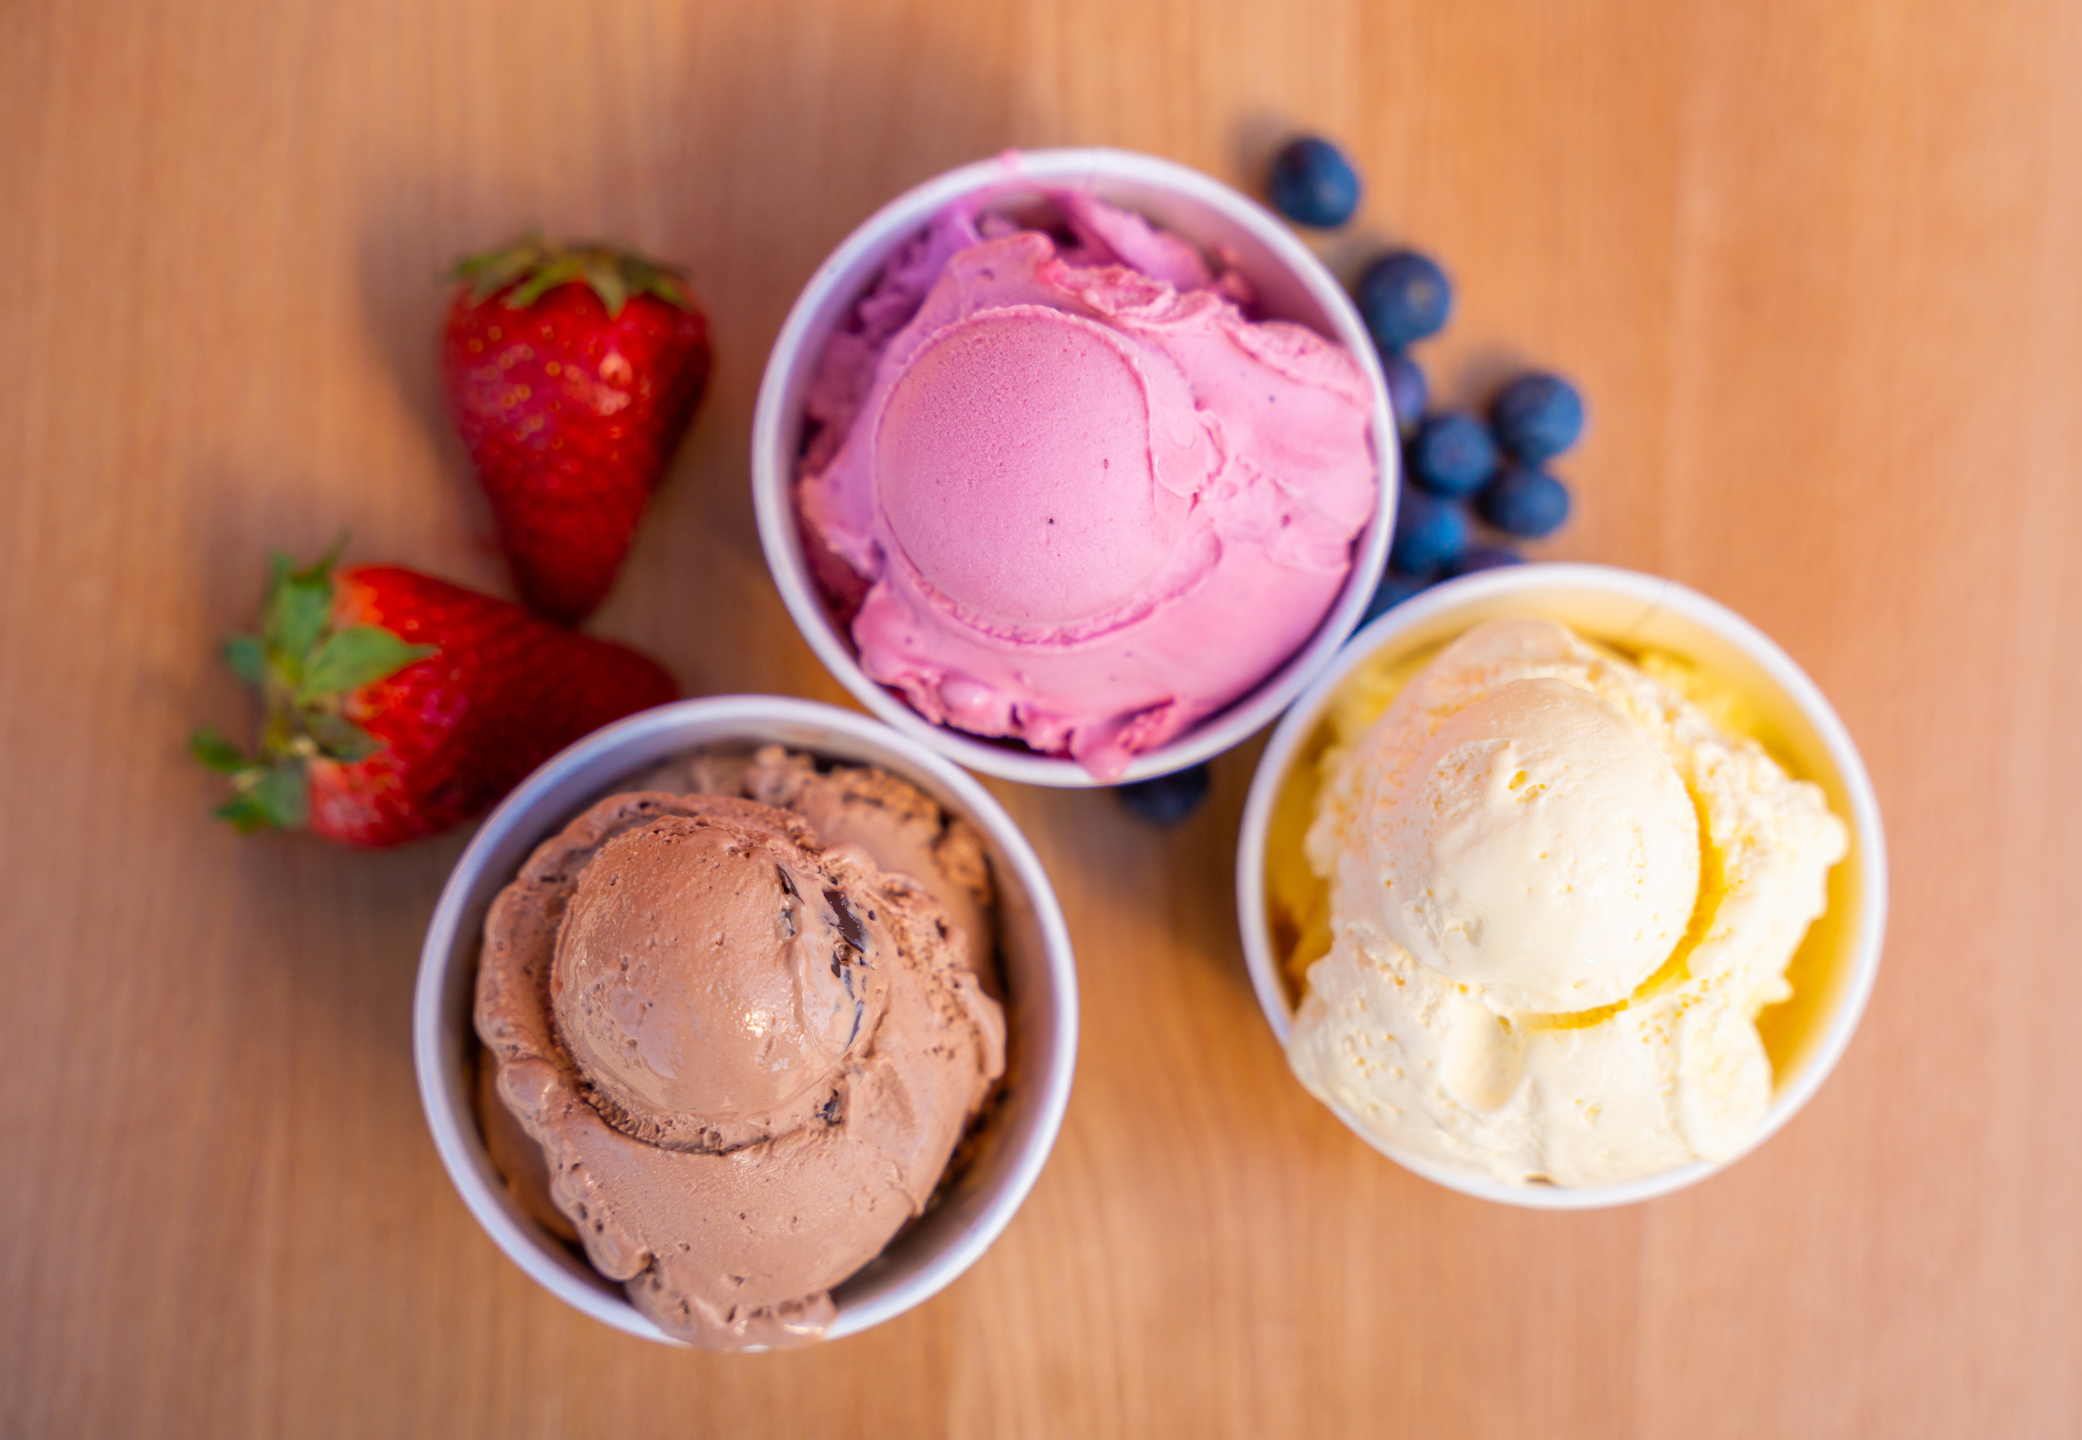 Colorful ice cream scoops in paper cups with berries on wooden table